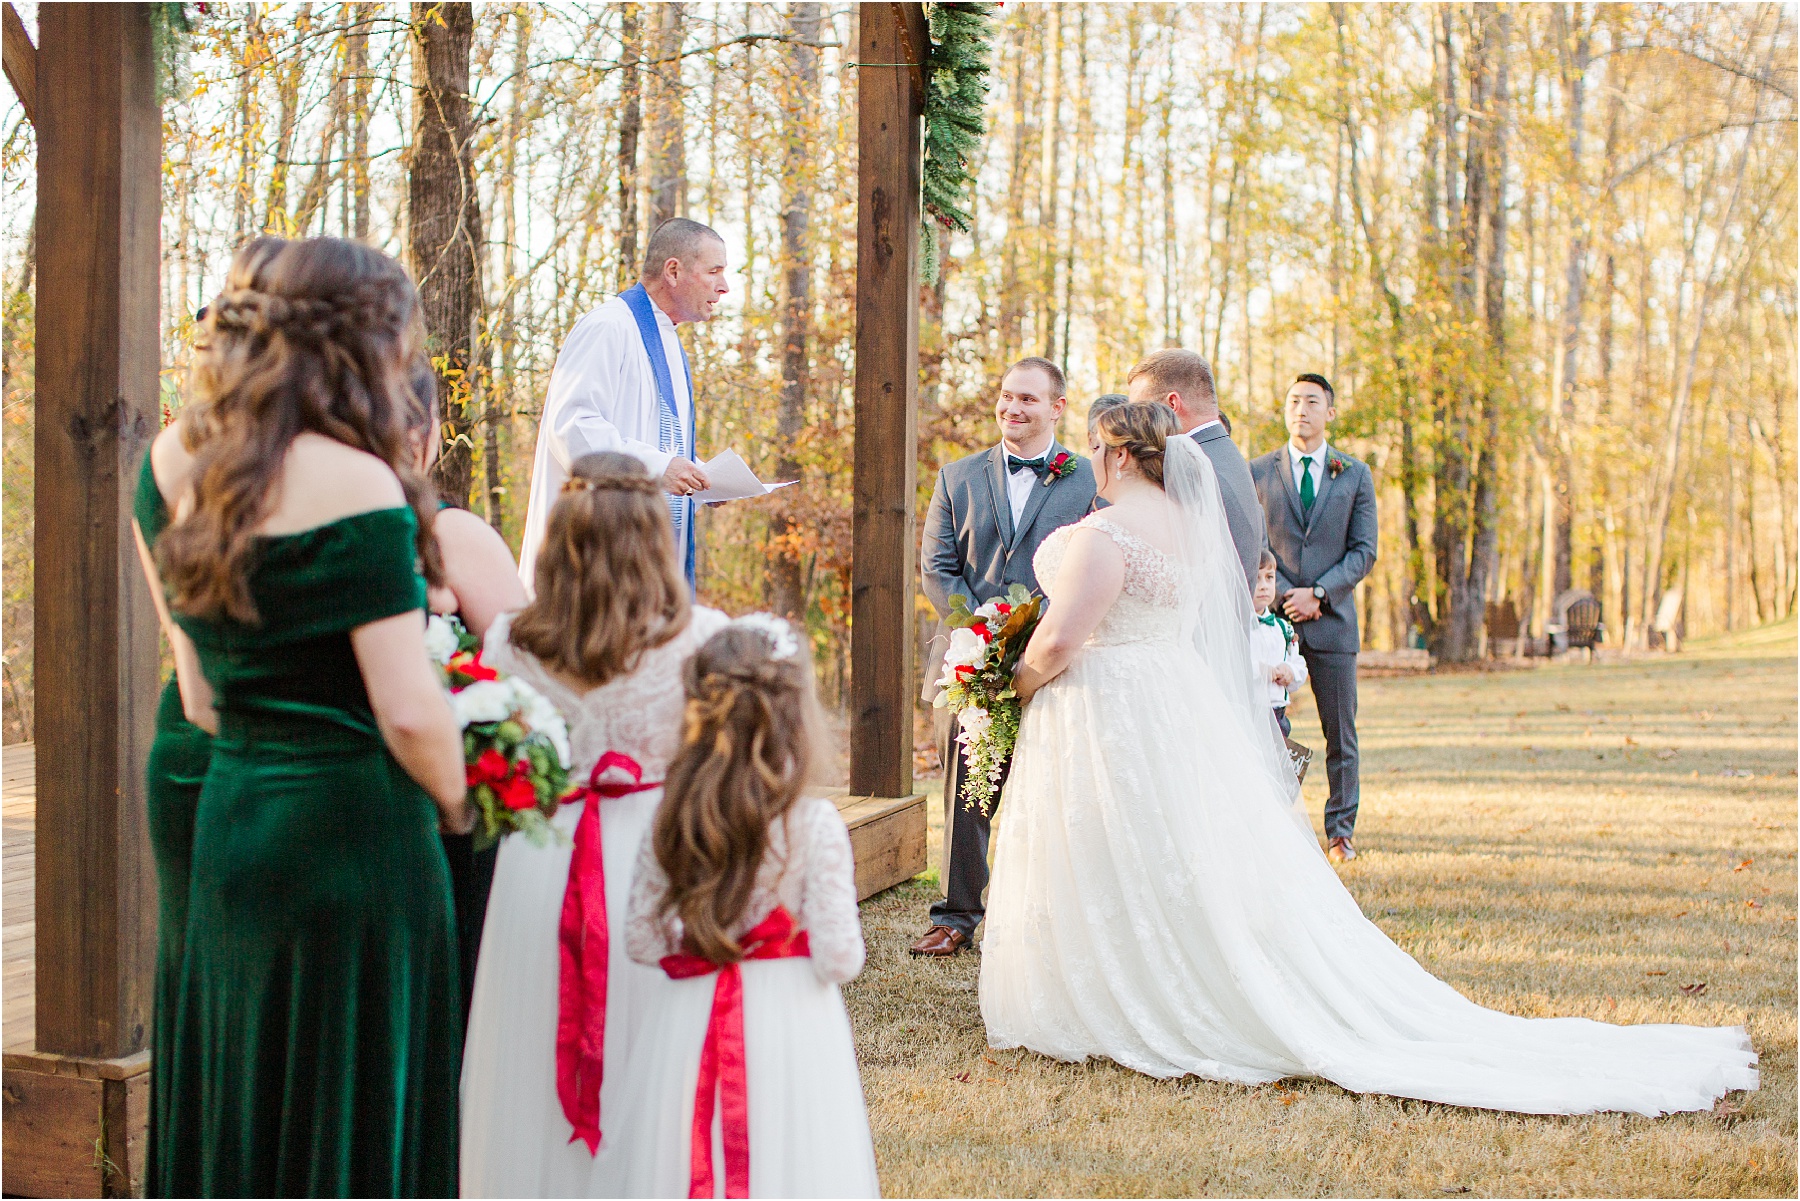 father giving away bride to husband at ceremony